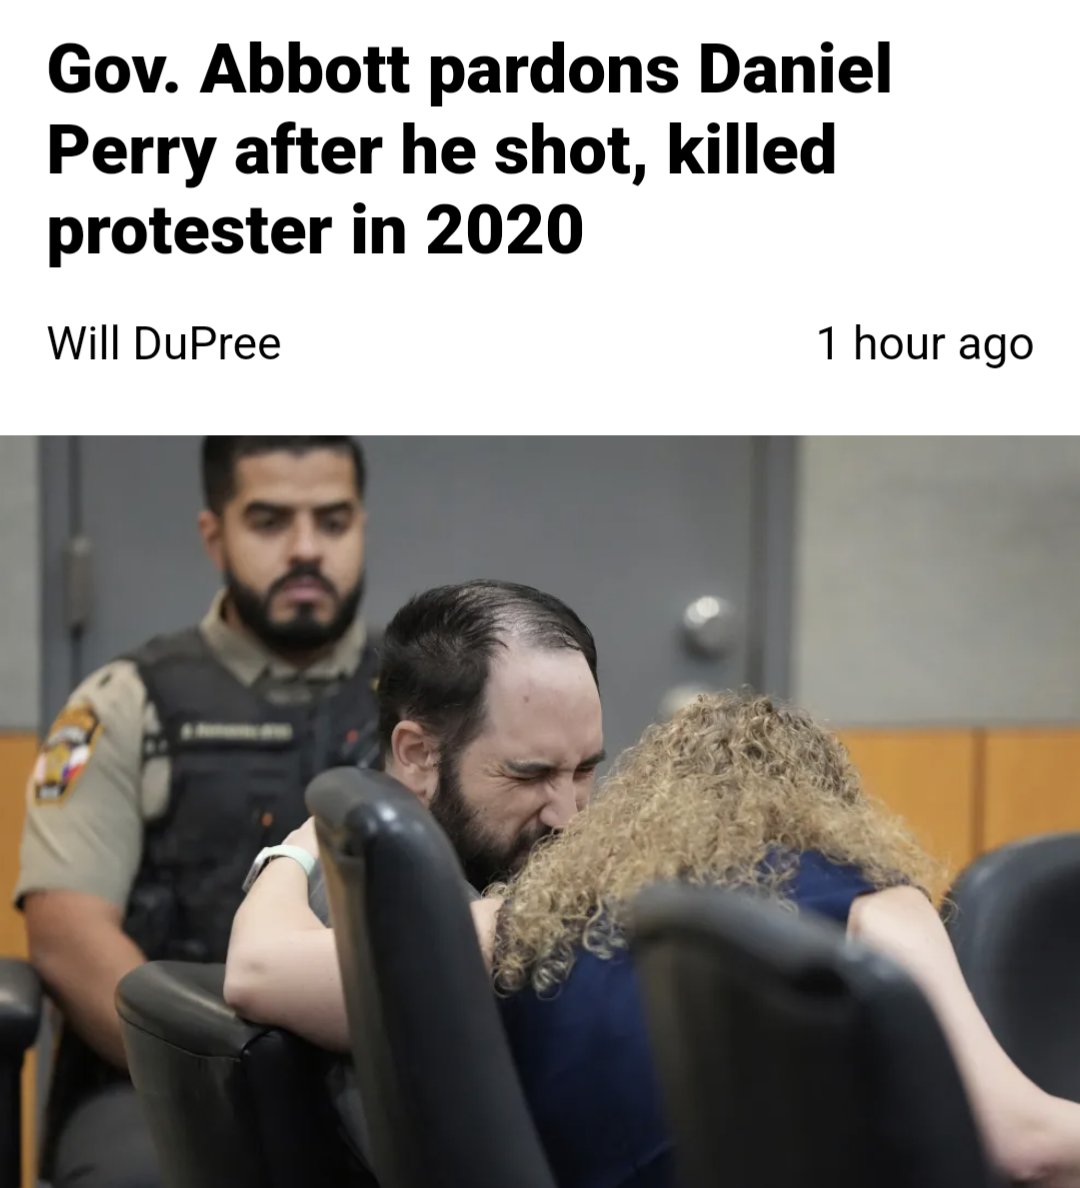 Congrats to Governor Abbott for pardoning a White Supremacists who intentionally ran over protesters, and then shot the person who tried to confront him.